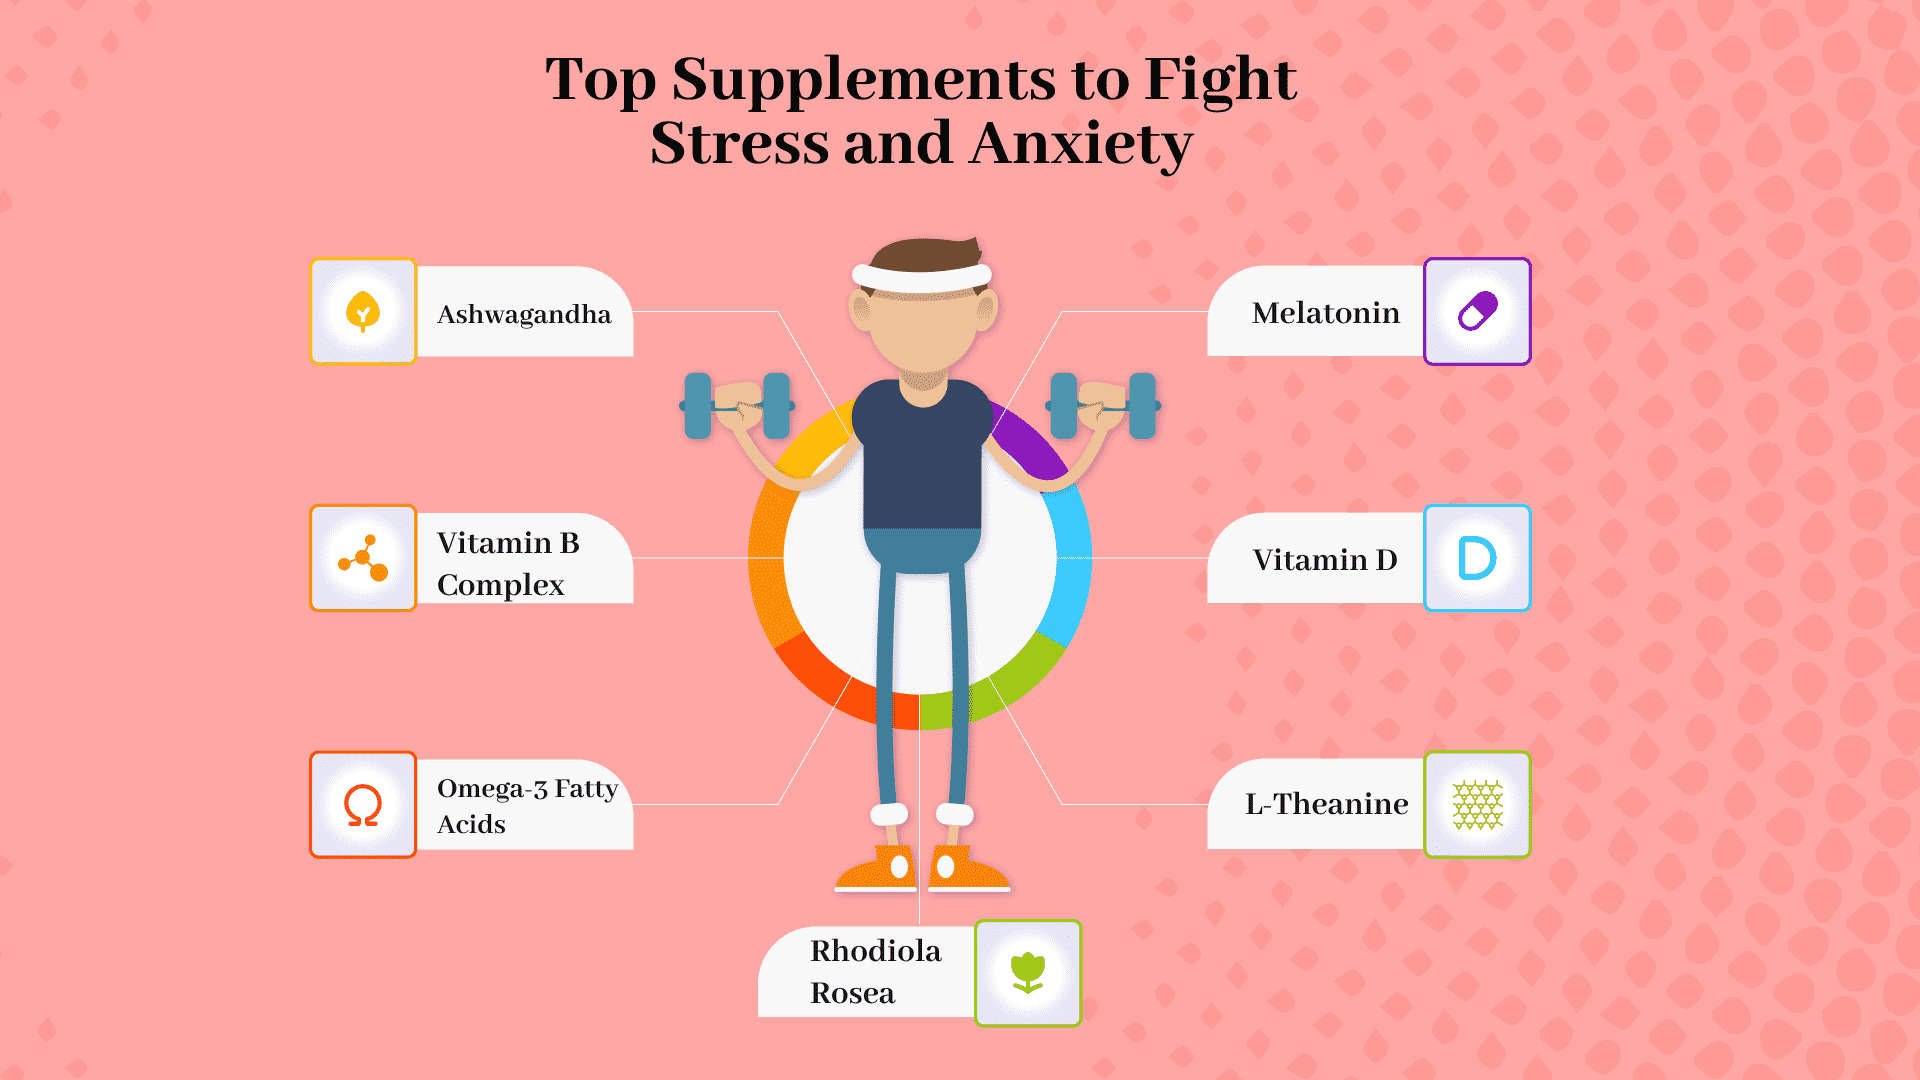 Top Supplements to Fight Stress and Anxiety